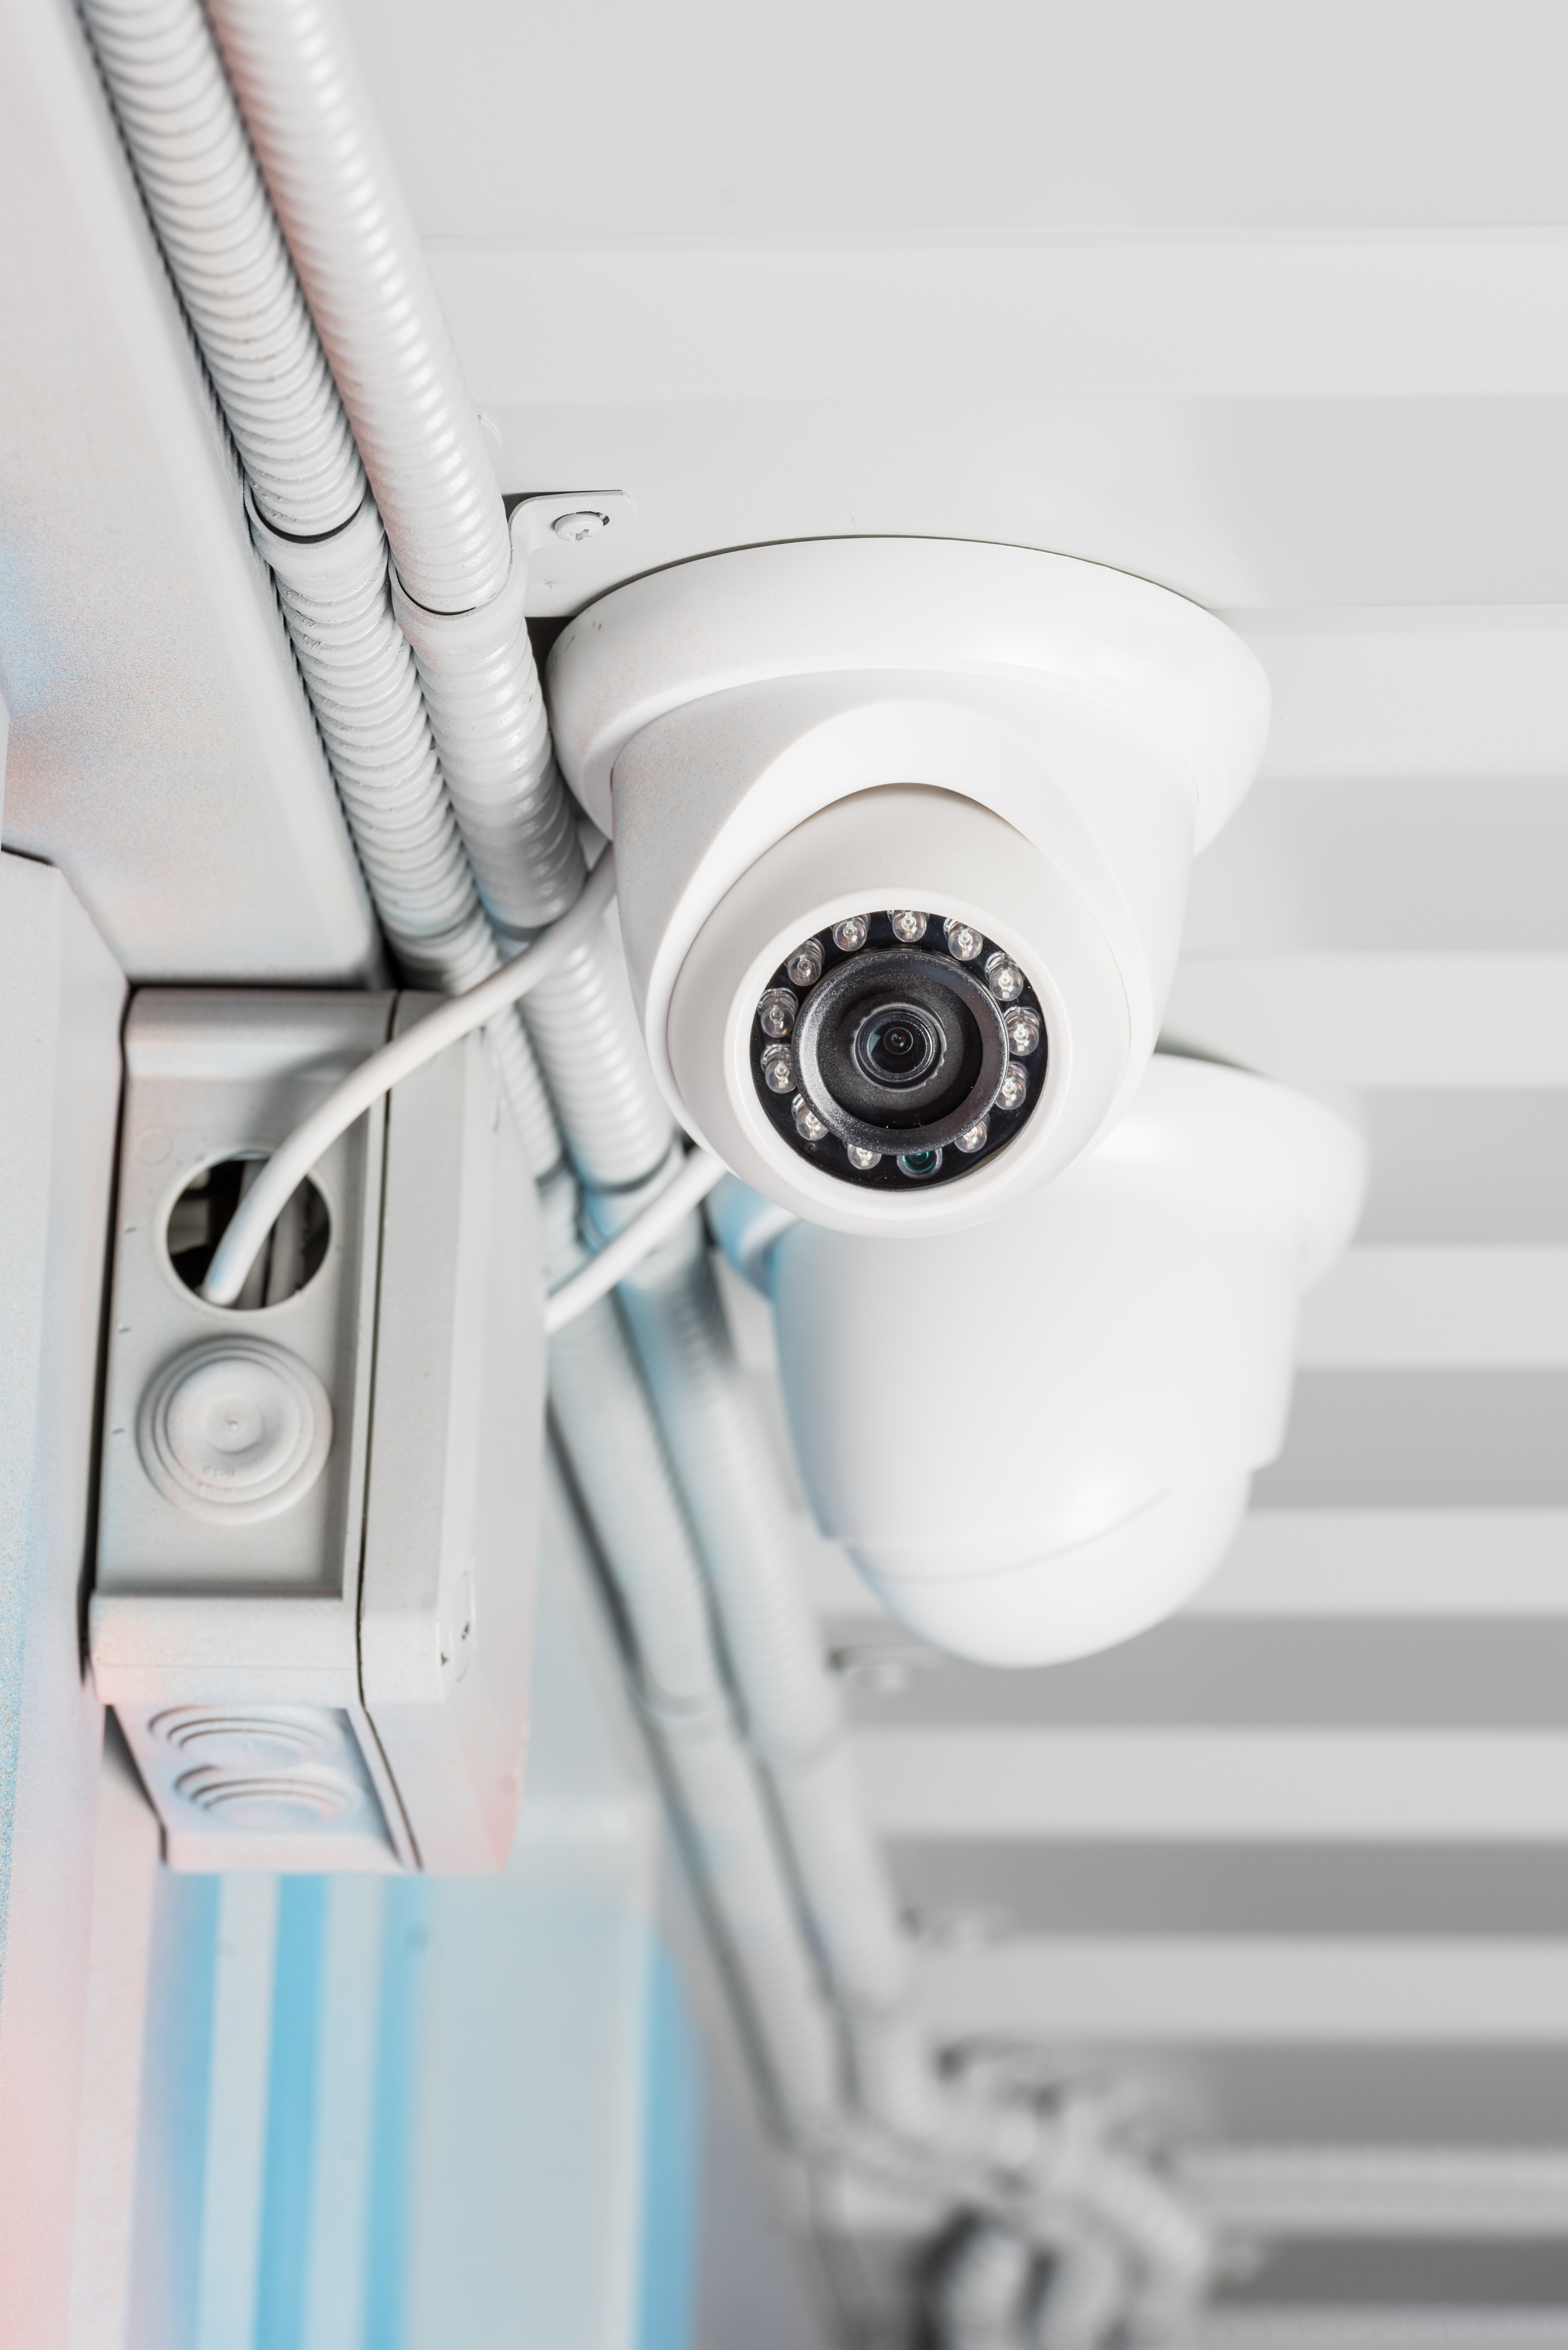 Ring Home Security System | Protect Your Property with Our Services